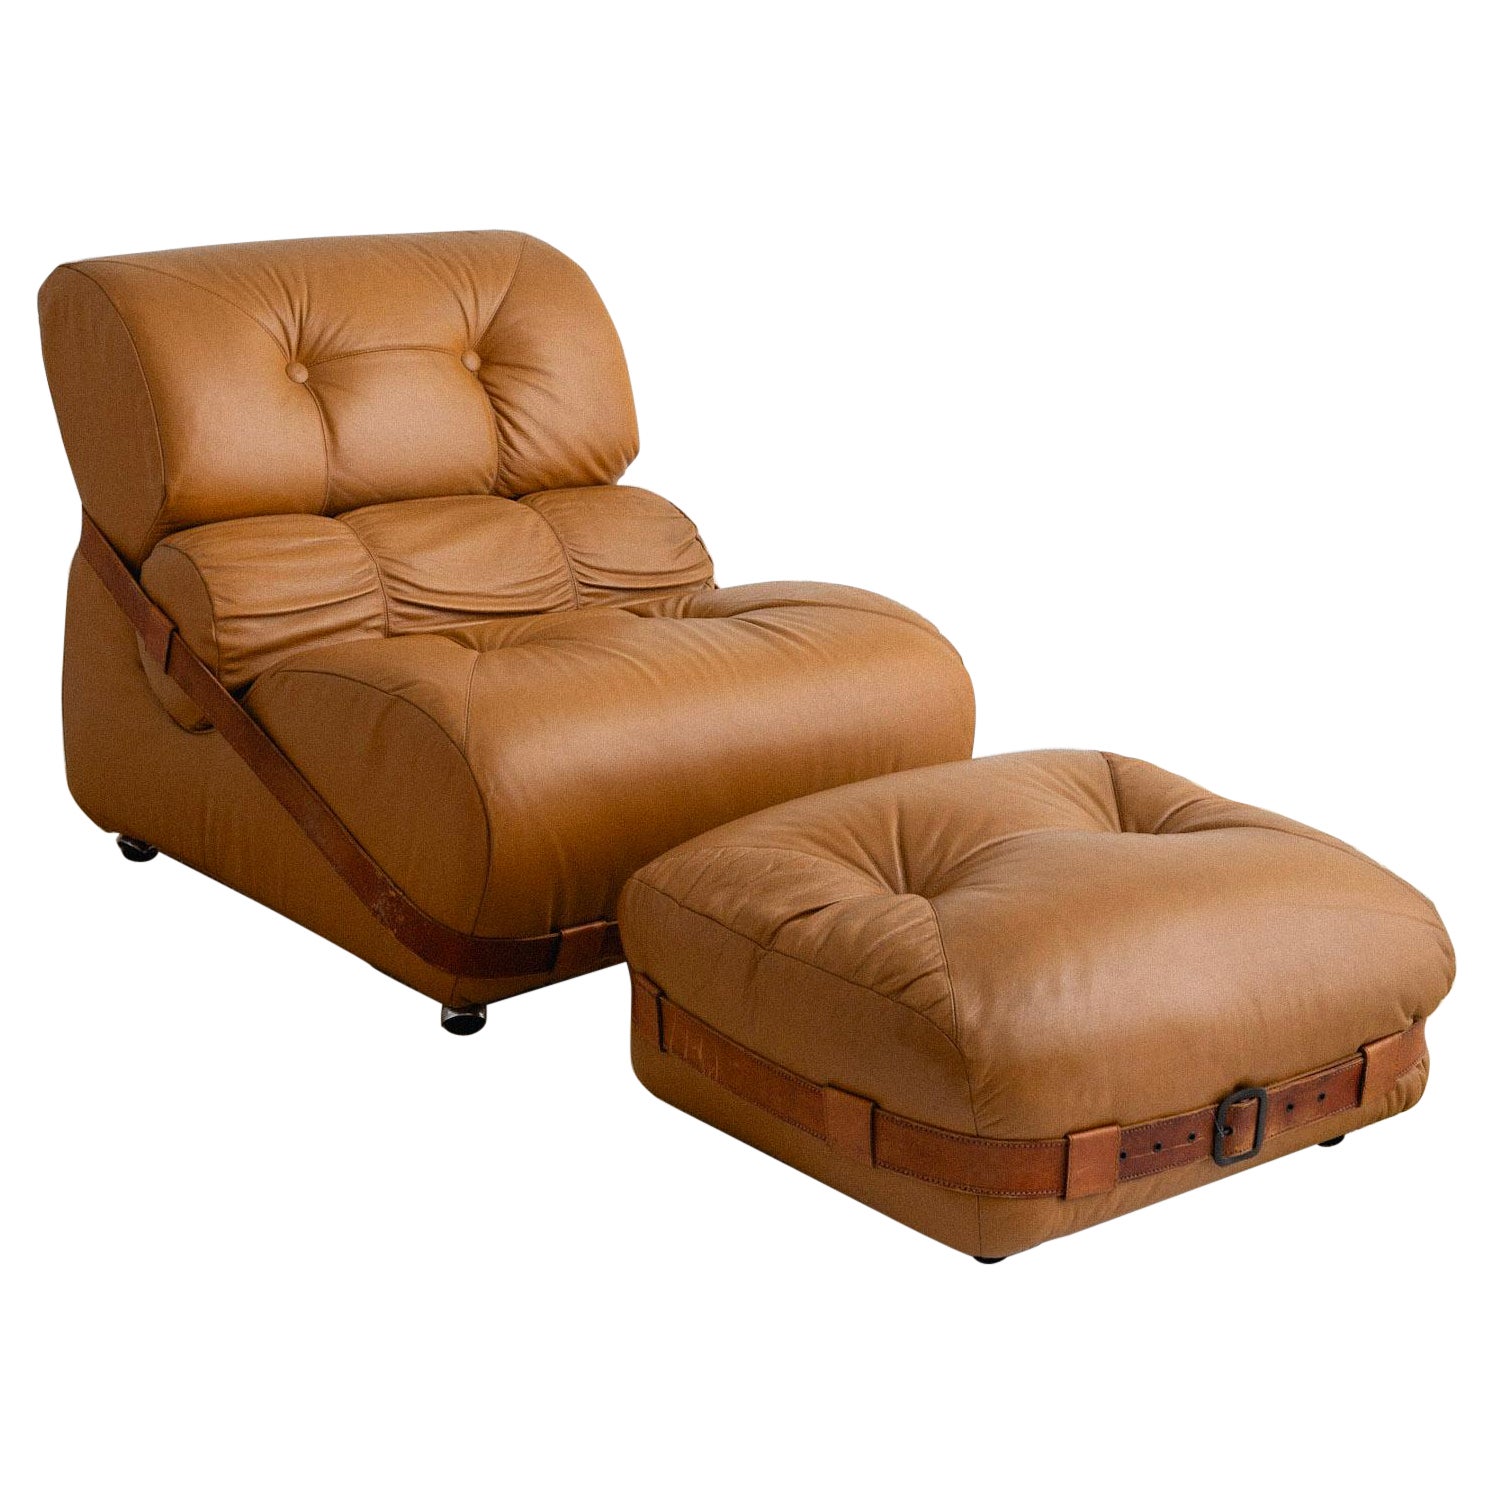 Overstuffed Italian Leather Lounge Chair & Ottoman For Sale